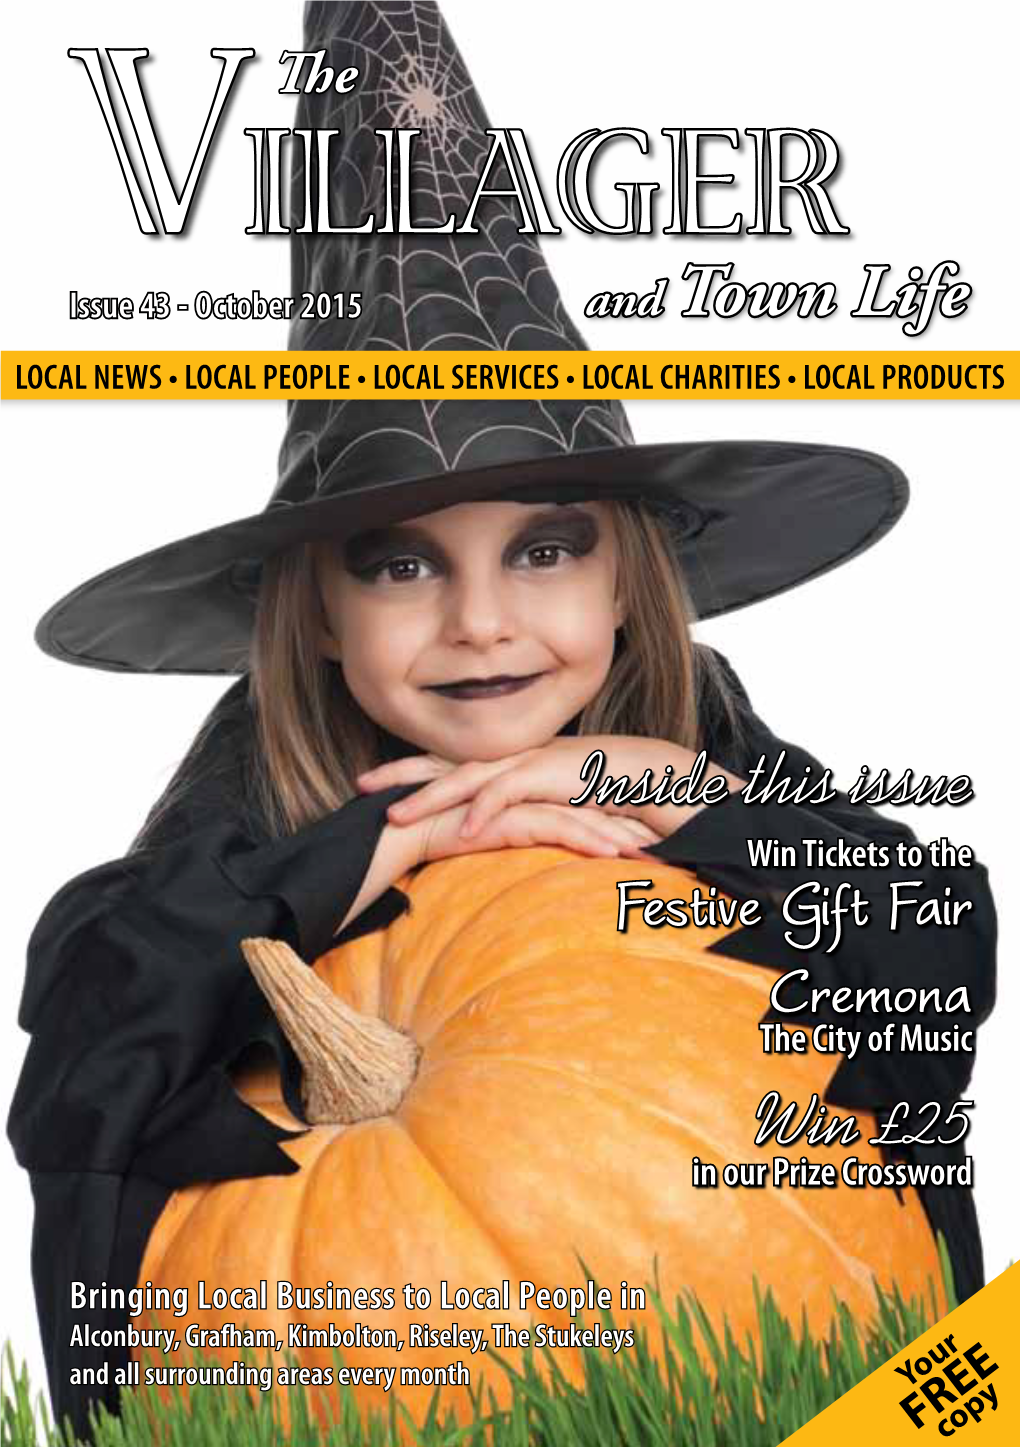 VILLAGER Issue 43 - October 2015 and Town Life LOCAL NEWS • LOCAL PEOPLE • LOCAL SERVICES • LOCAL CHARITIES • LOCAL PRODUCTS